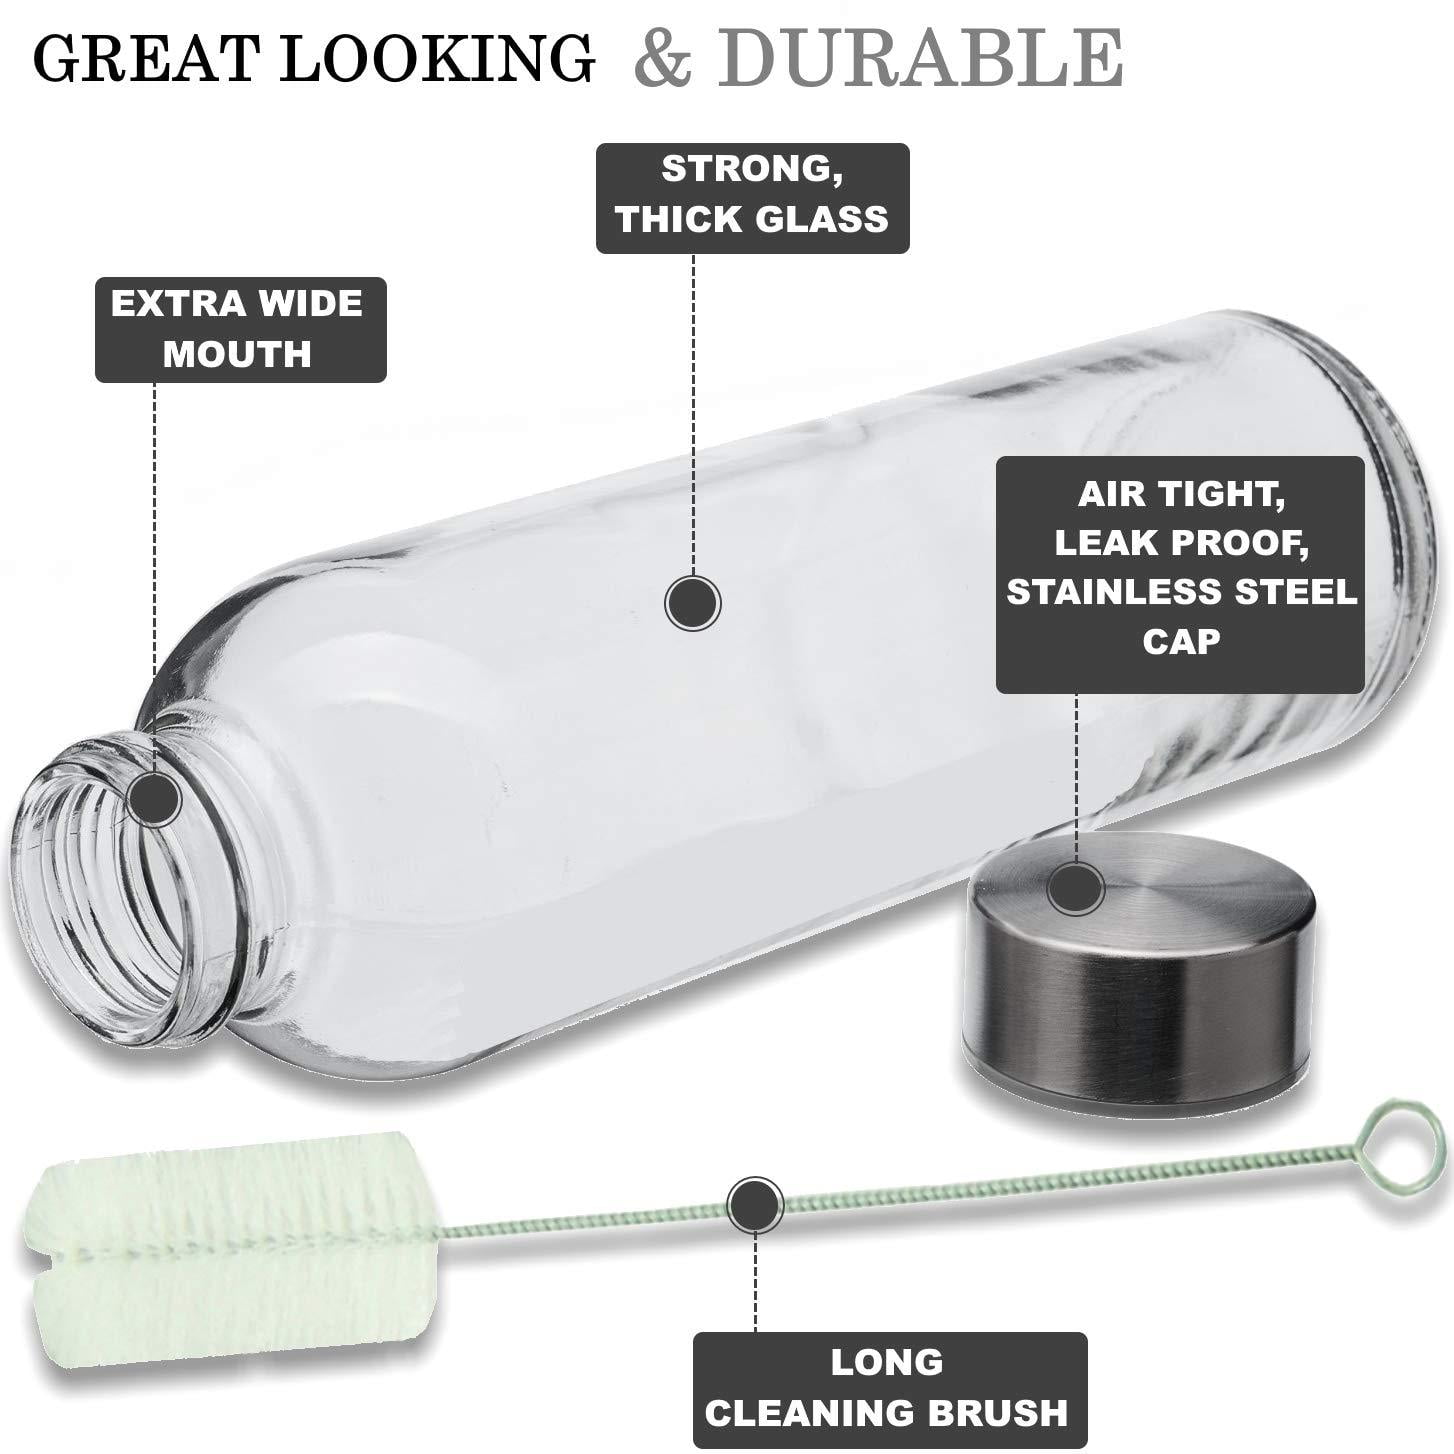 Brieftons Glass Water Bottles With Caps: Clear, 6 Pack, 18 Oz, Leakproof  Lids, Premium Soda Lime, Be…See more Brieftons Glass Water Bottles With  Caps